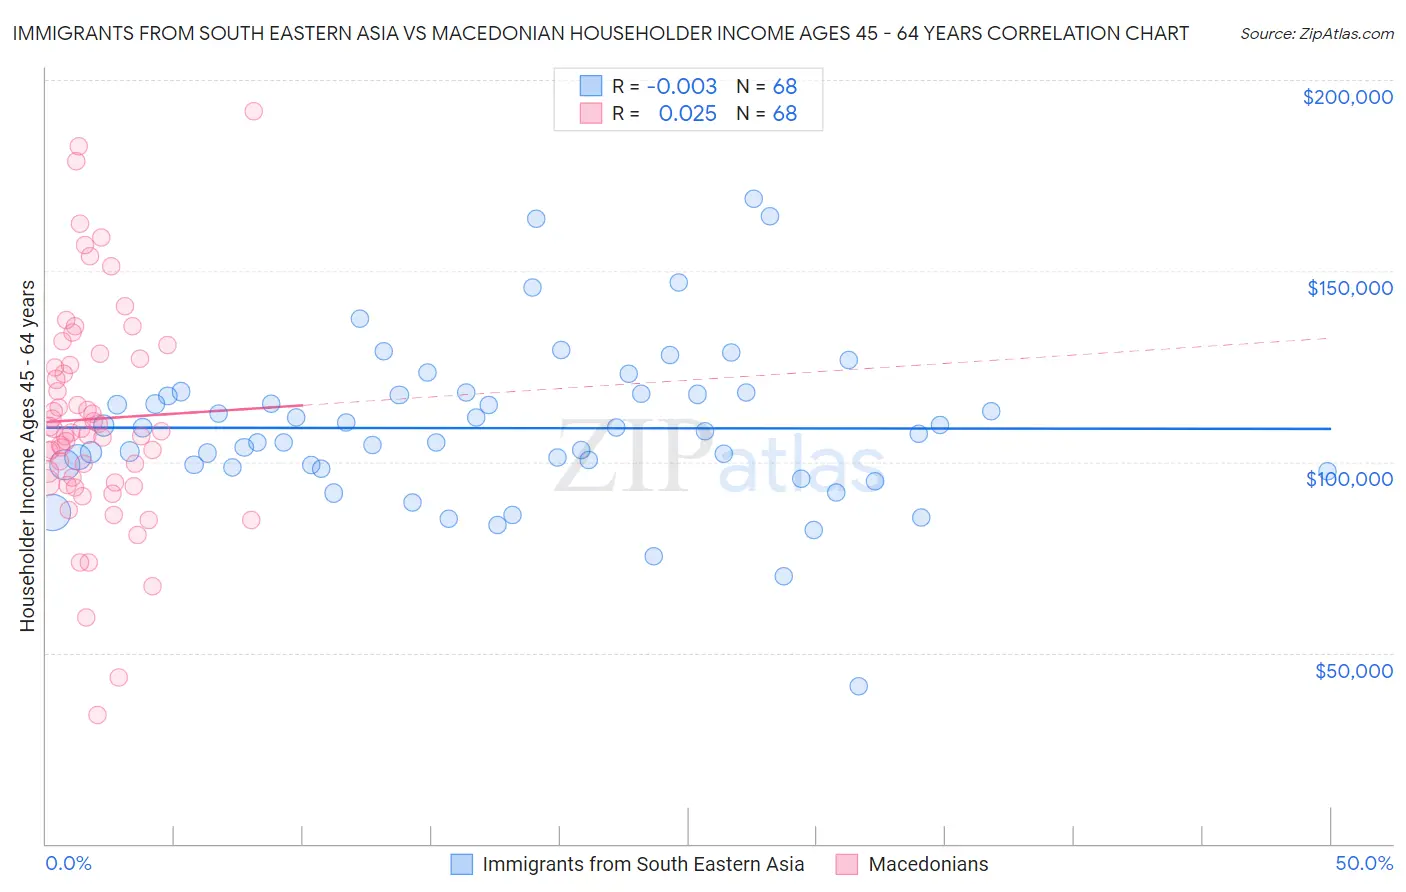 Immigrants from South Eastern Asia vs Macedonian Householder Income Ages 45 - 64 years